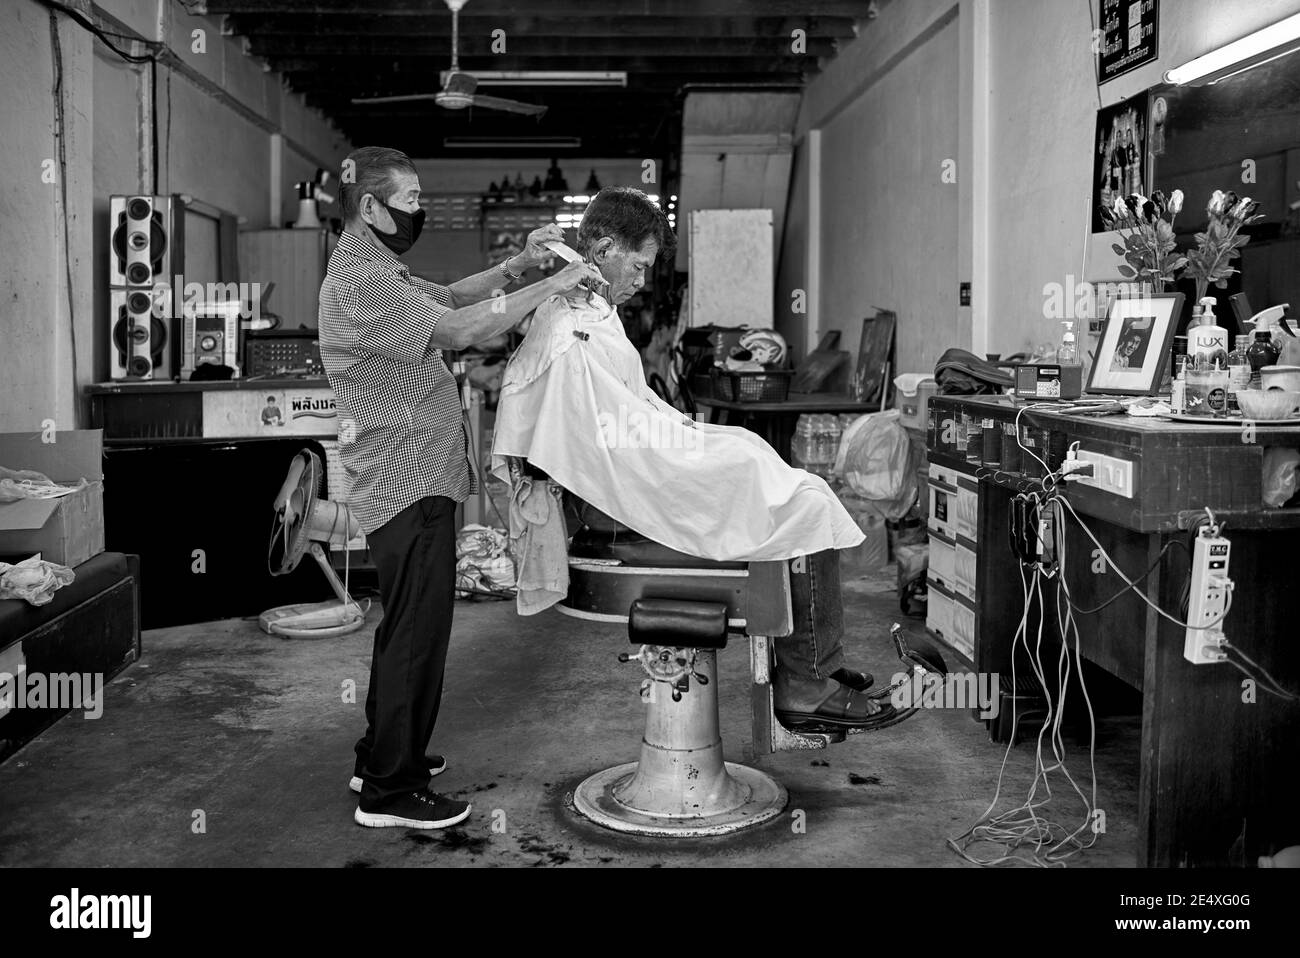 Thailand barber shop with vintage equipment and layout in downtown Bangkok with man receiving haircut. Thailand S. E. Asia.black and white photography Stock Photo